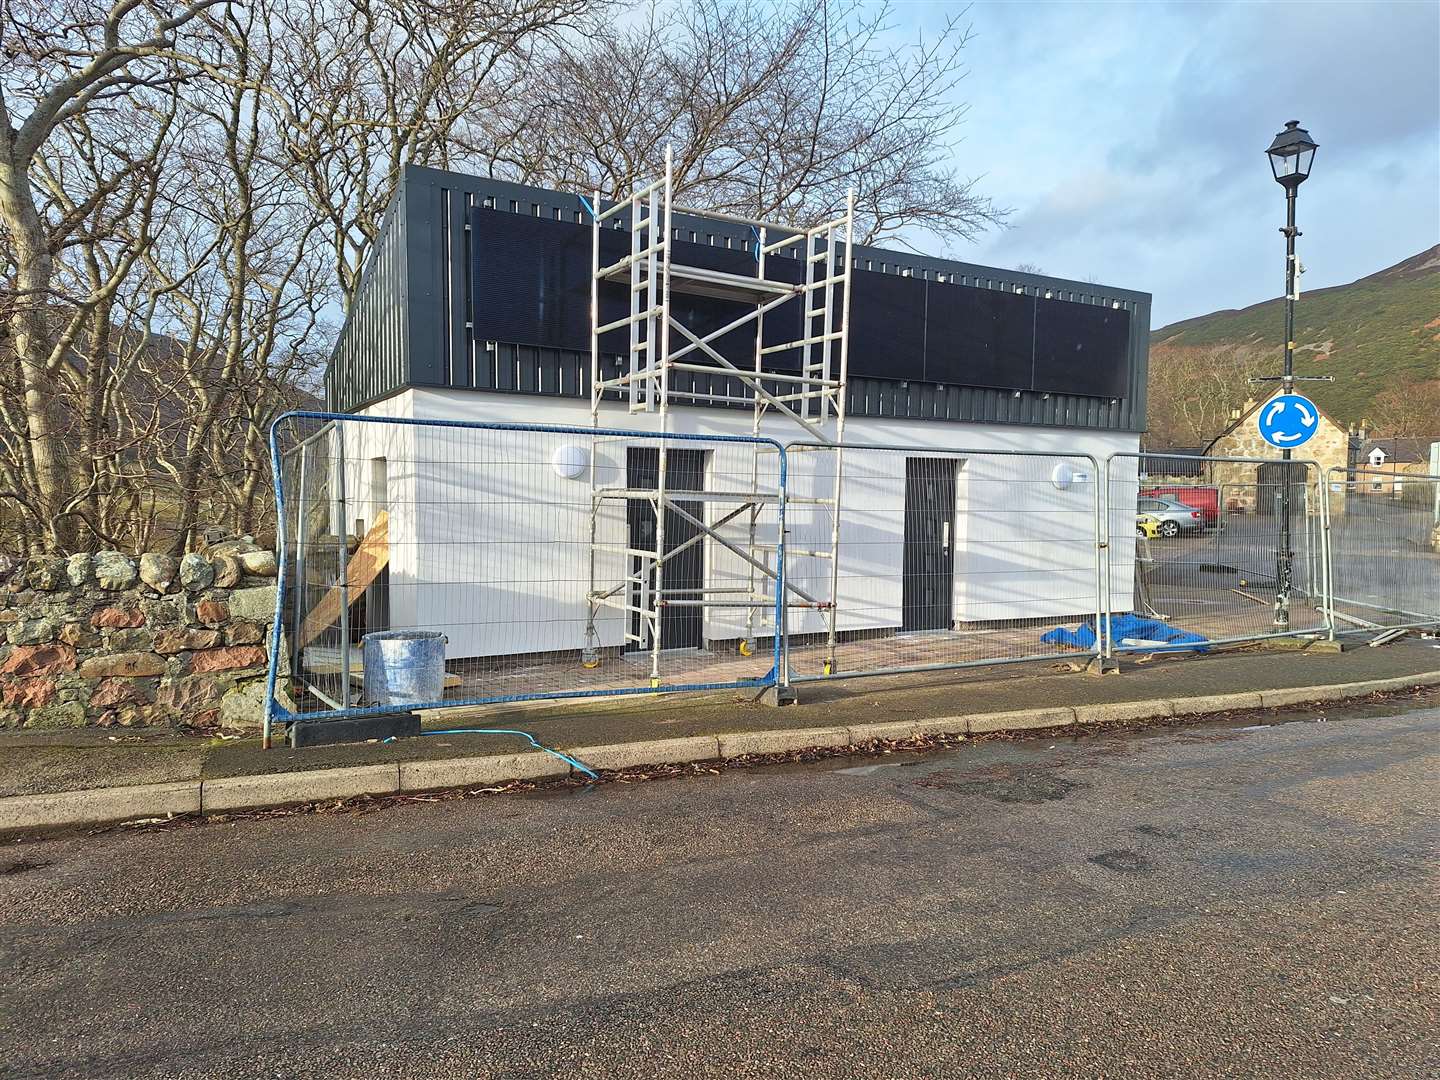 Helmsdale public toilets, which have been closed since 2018, are set to reopen following an extensive £217,000 refurbishment.